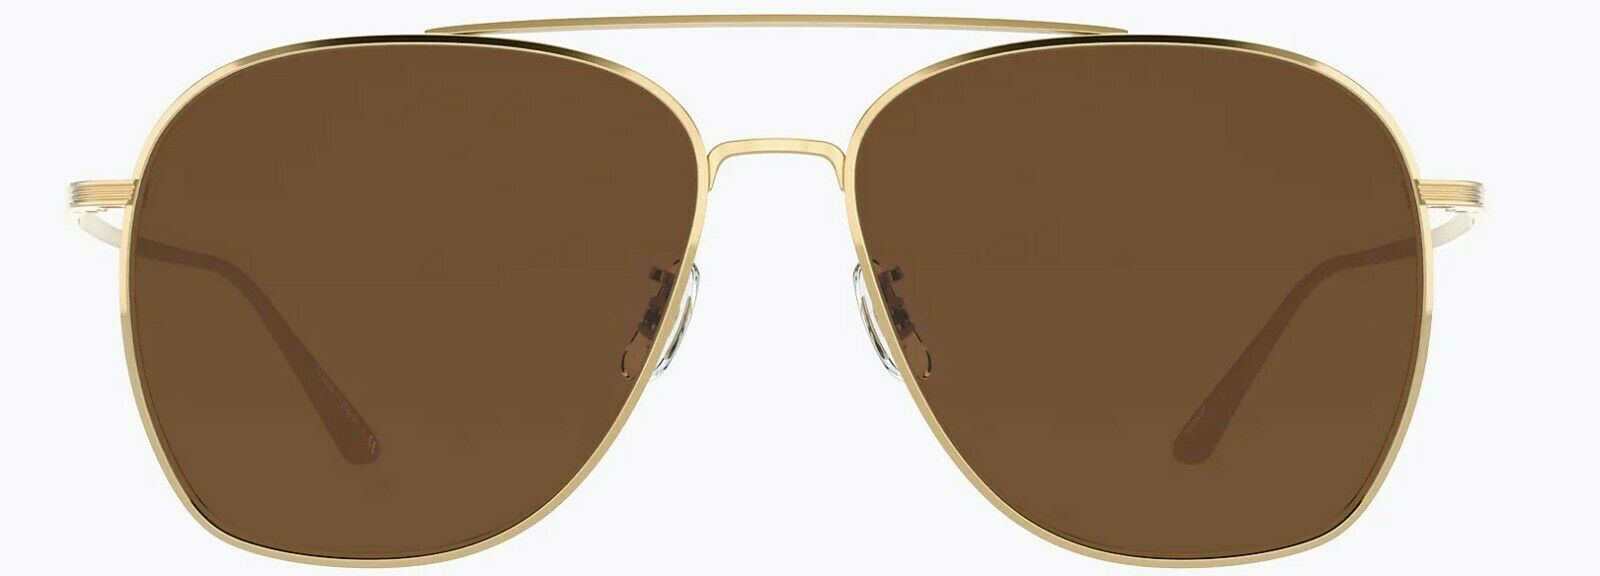 Oliver Peoples Sunglasses 1278ST 529257 The Row Ellerston Gold /Brown Polar 58mm-827934450905-classypw.com-1